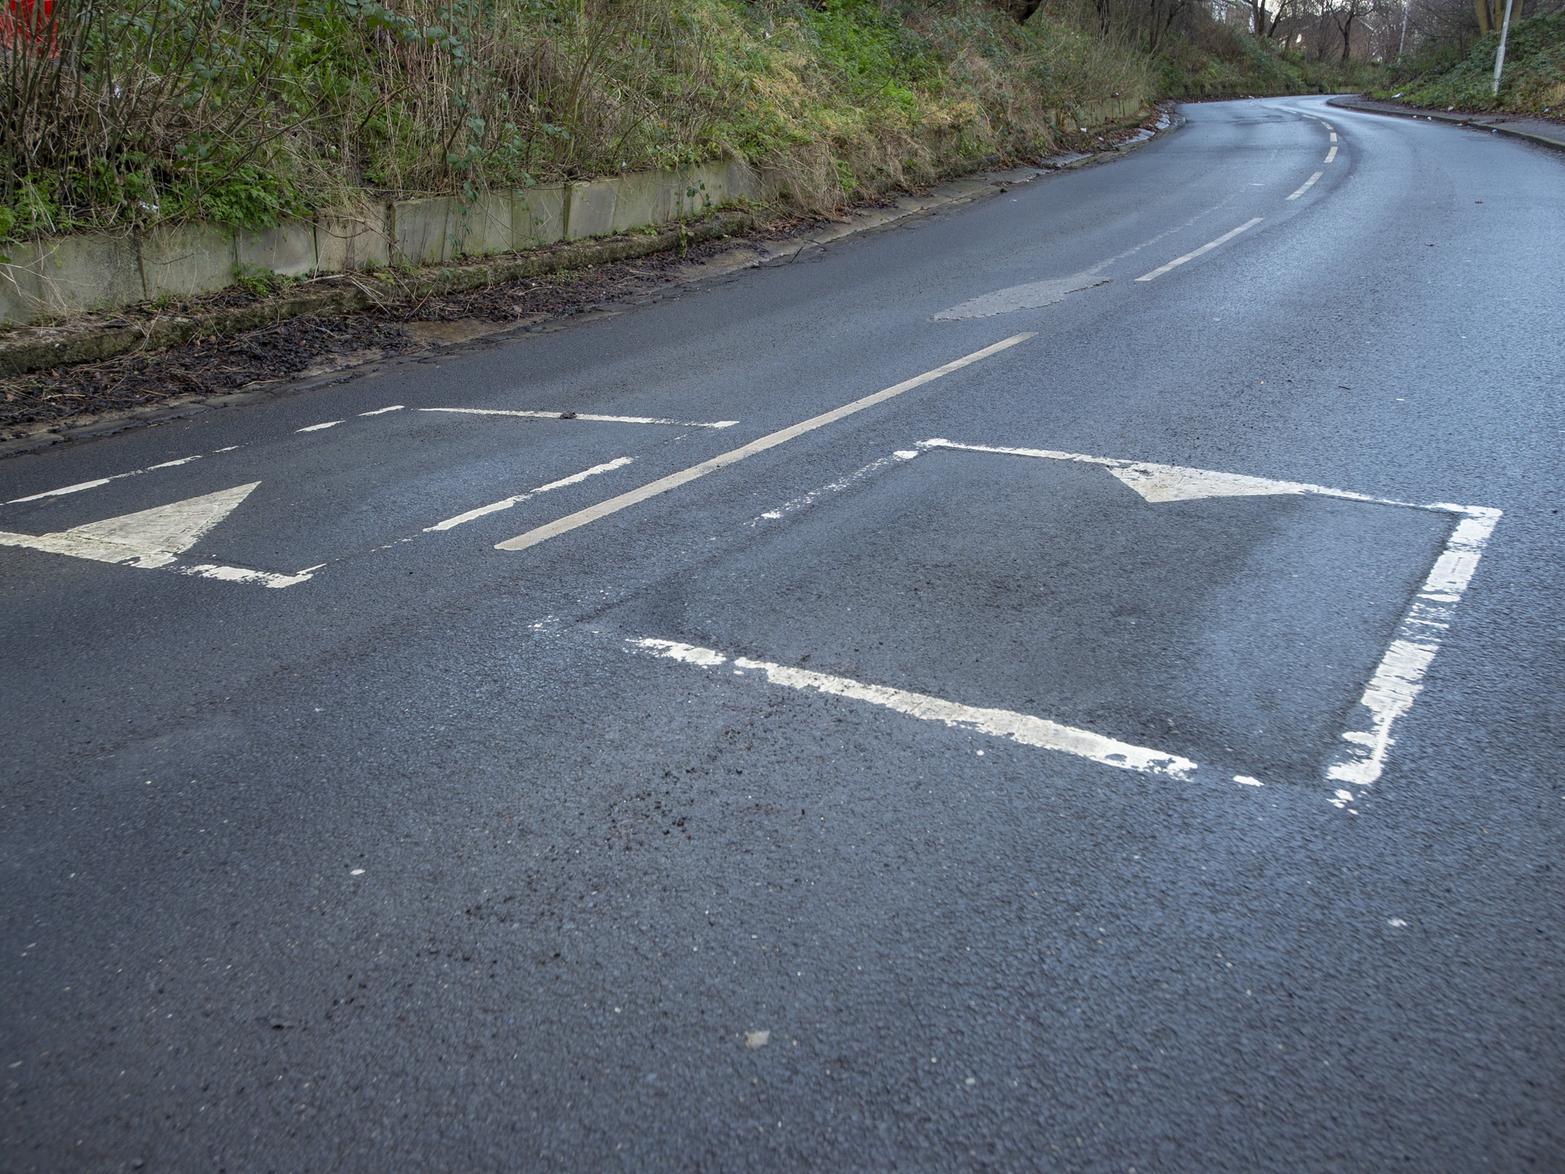 The council said officers will also be conducting further speed surveys and reviewing the impact of the existing traffic calming features.